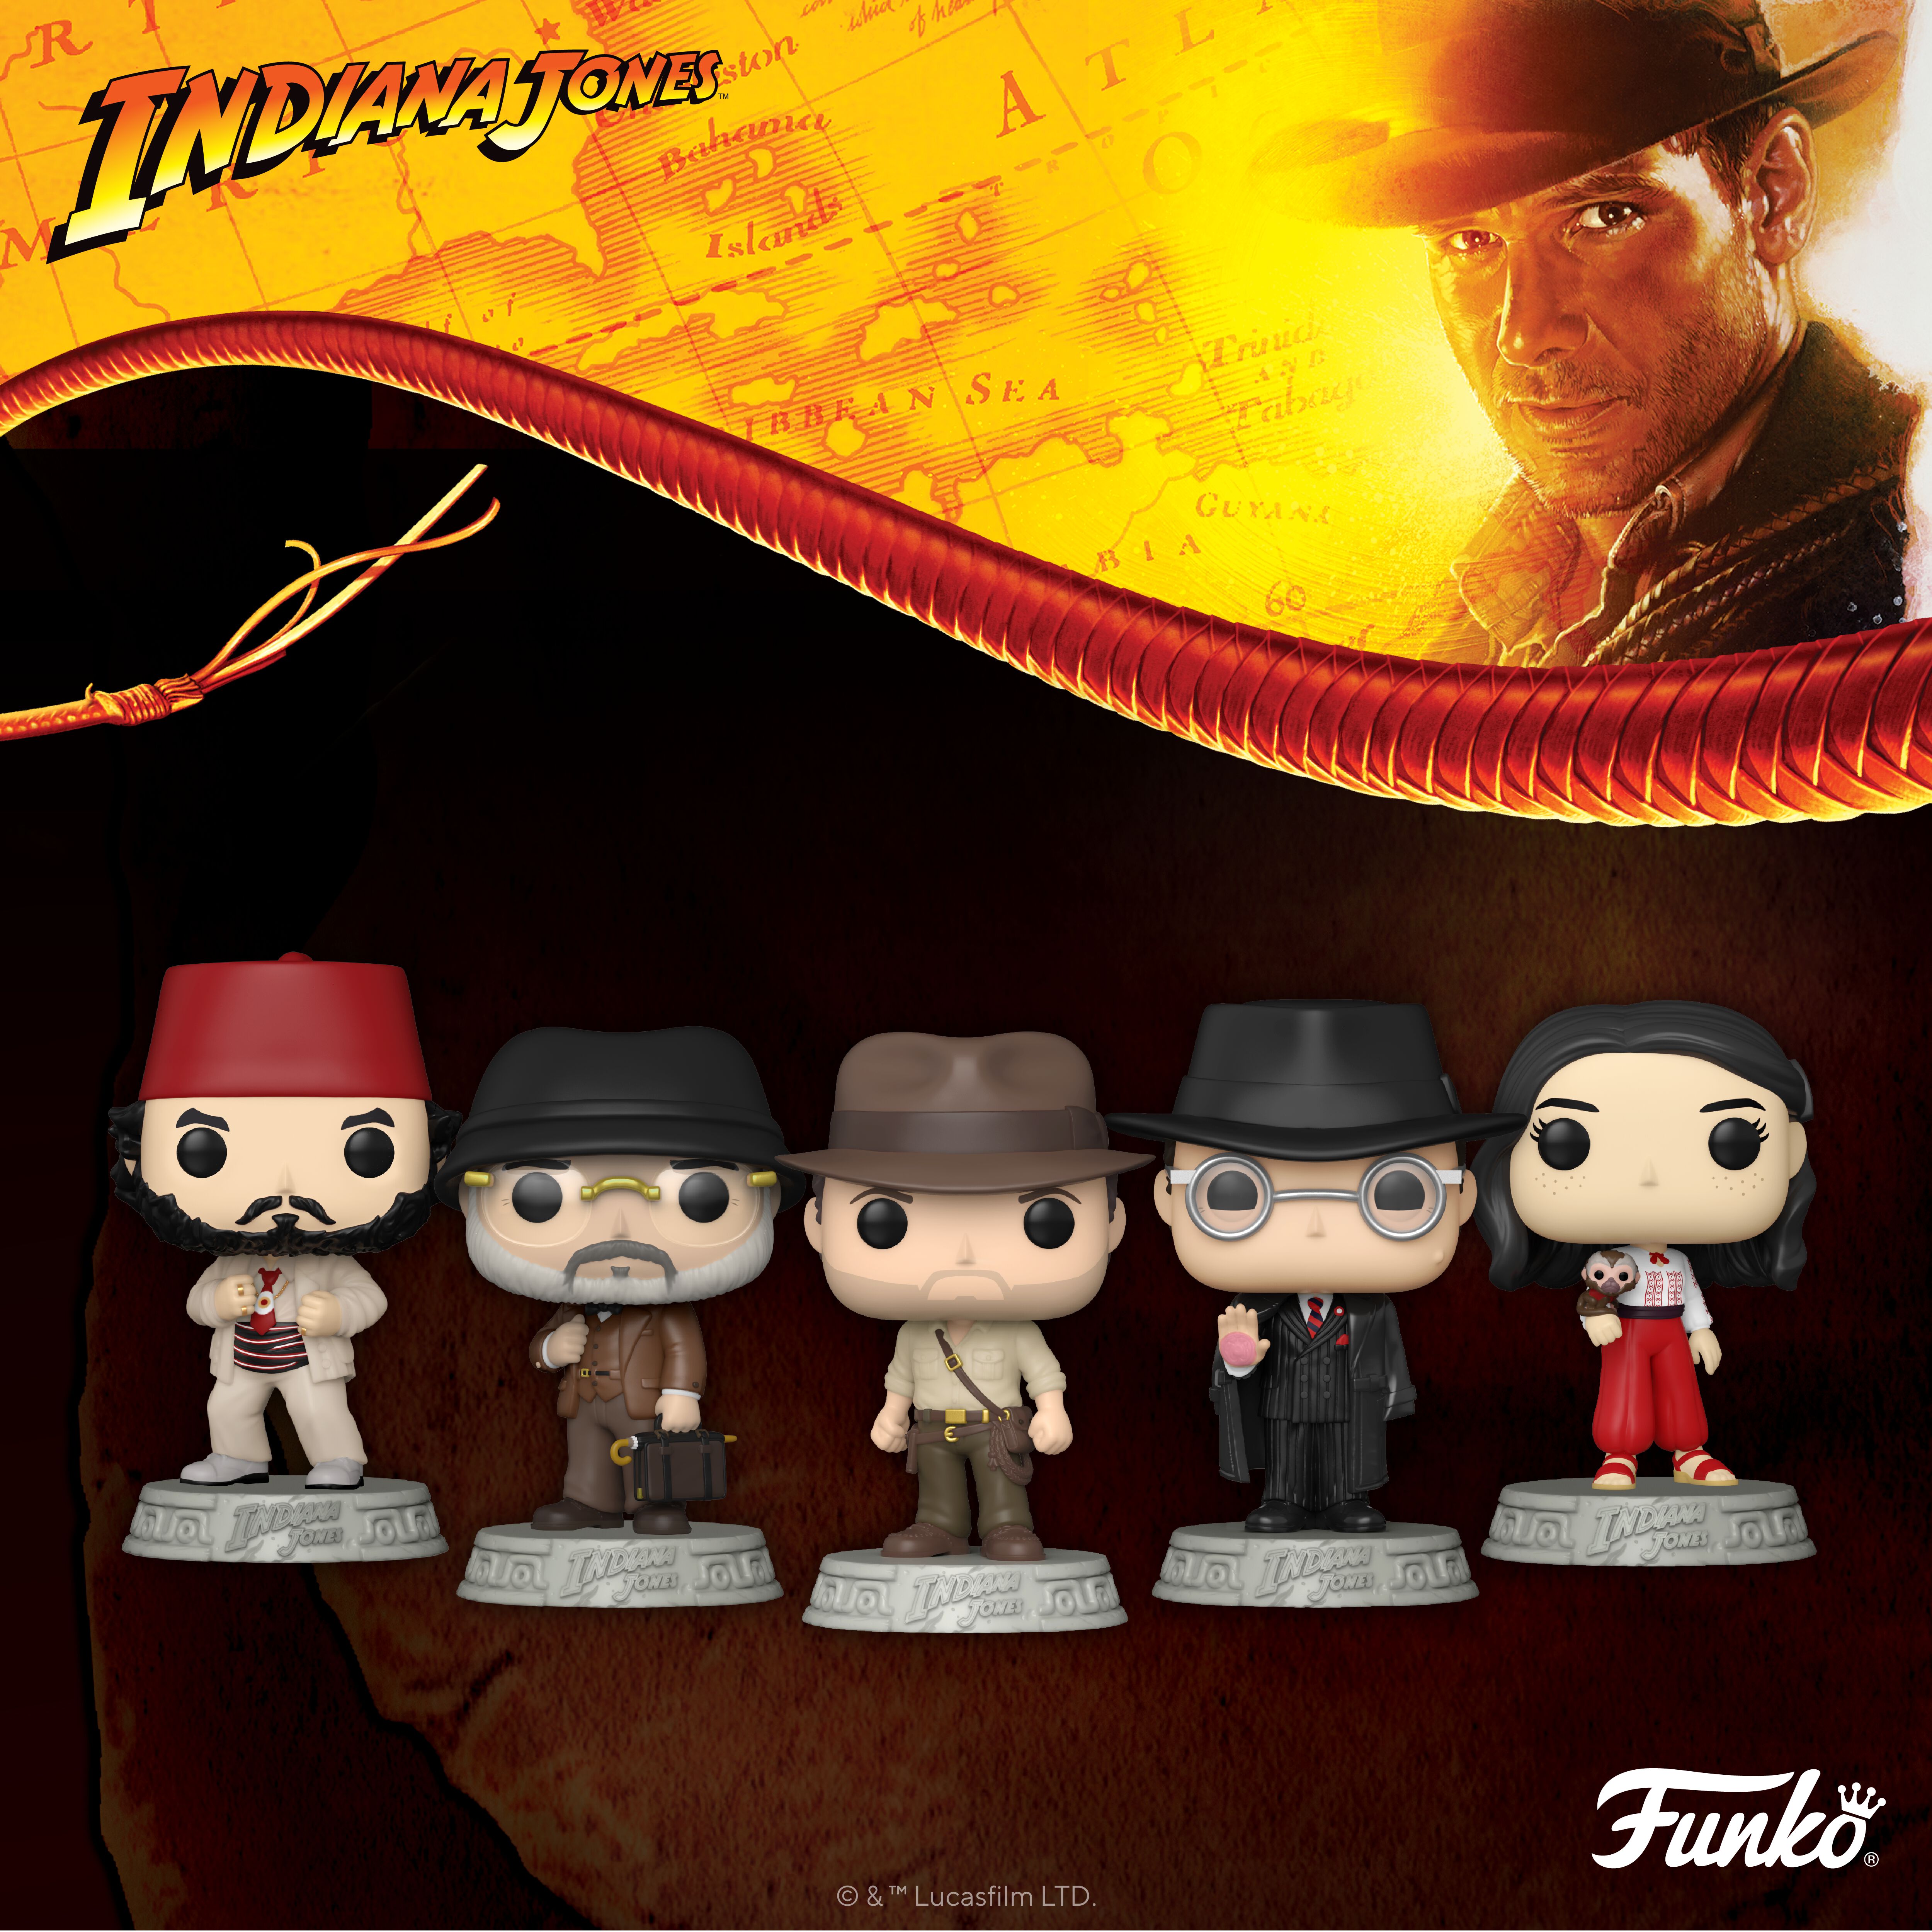 Indiana Jones™ Collection, Created and Curated by Funko